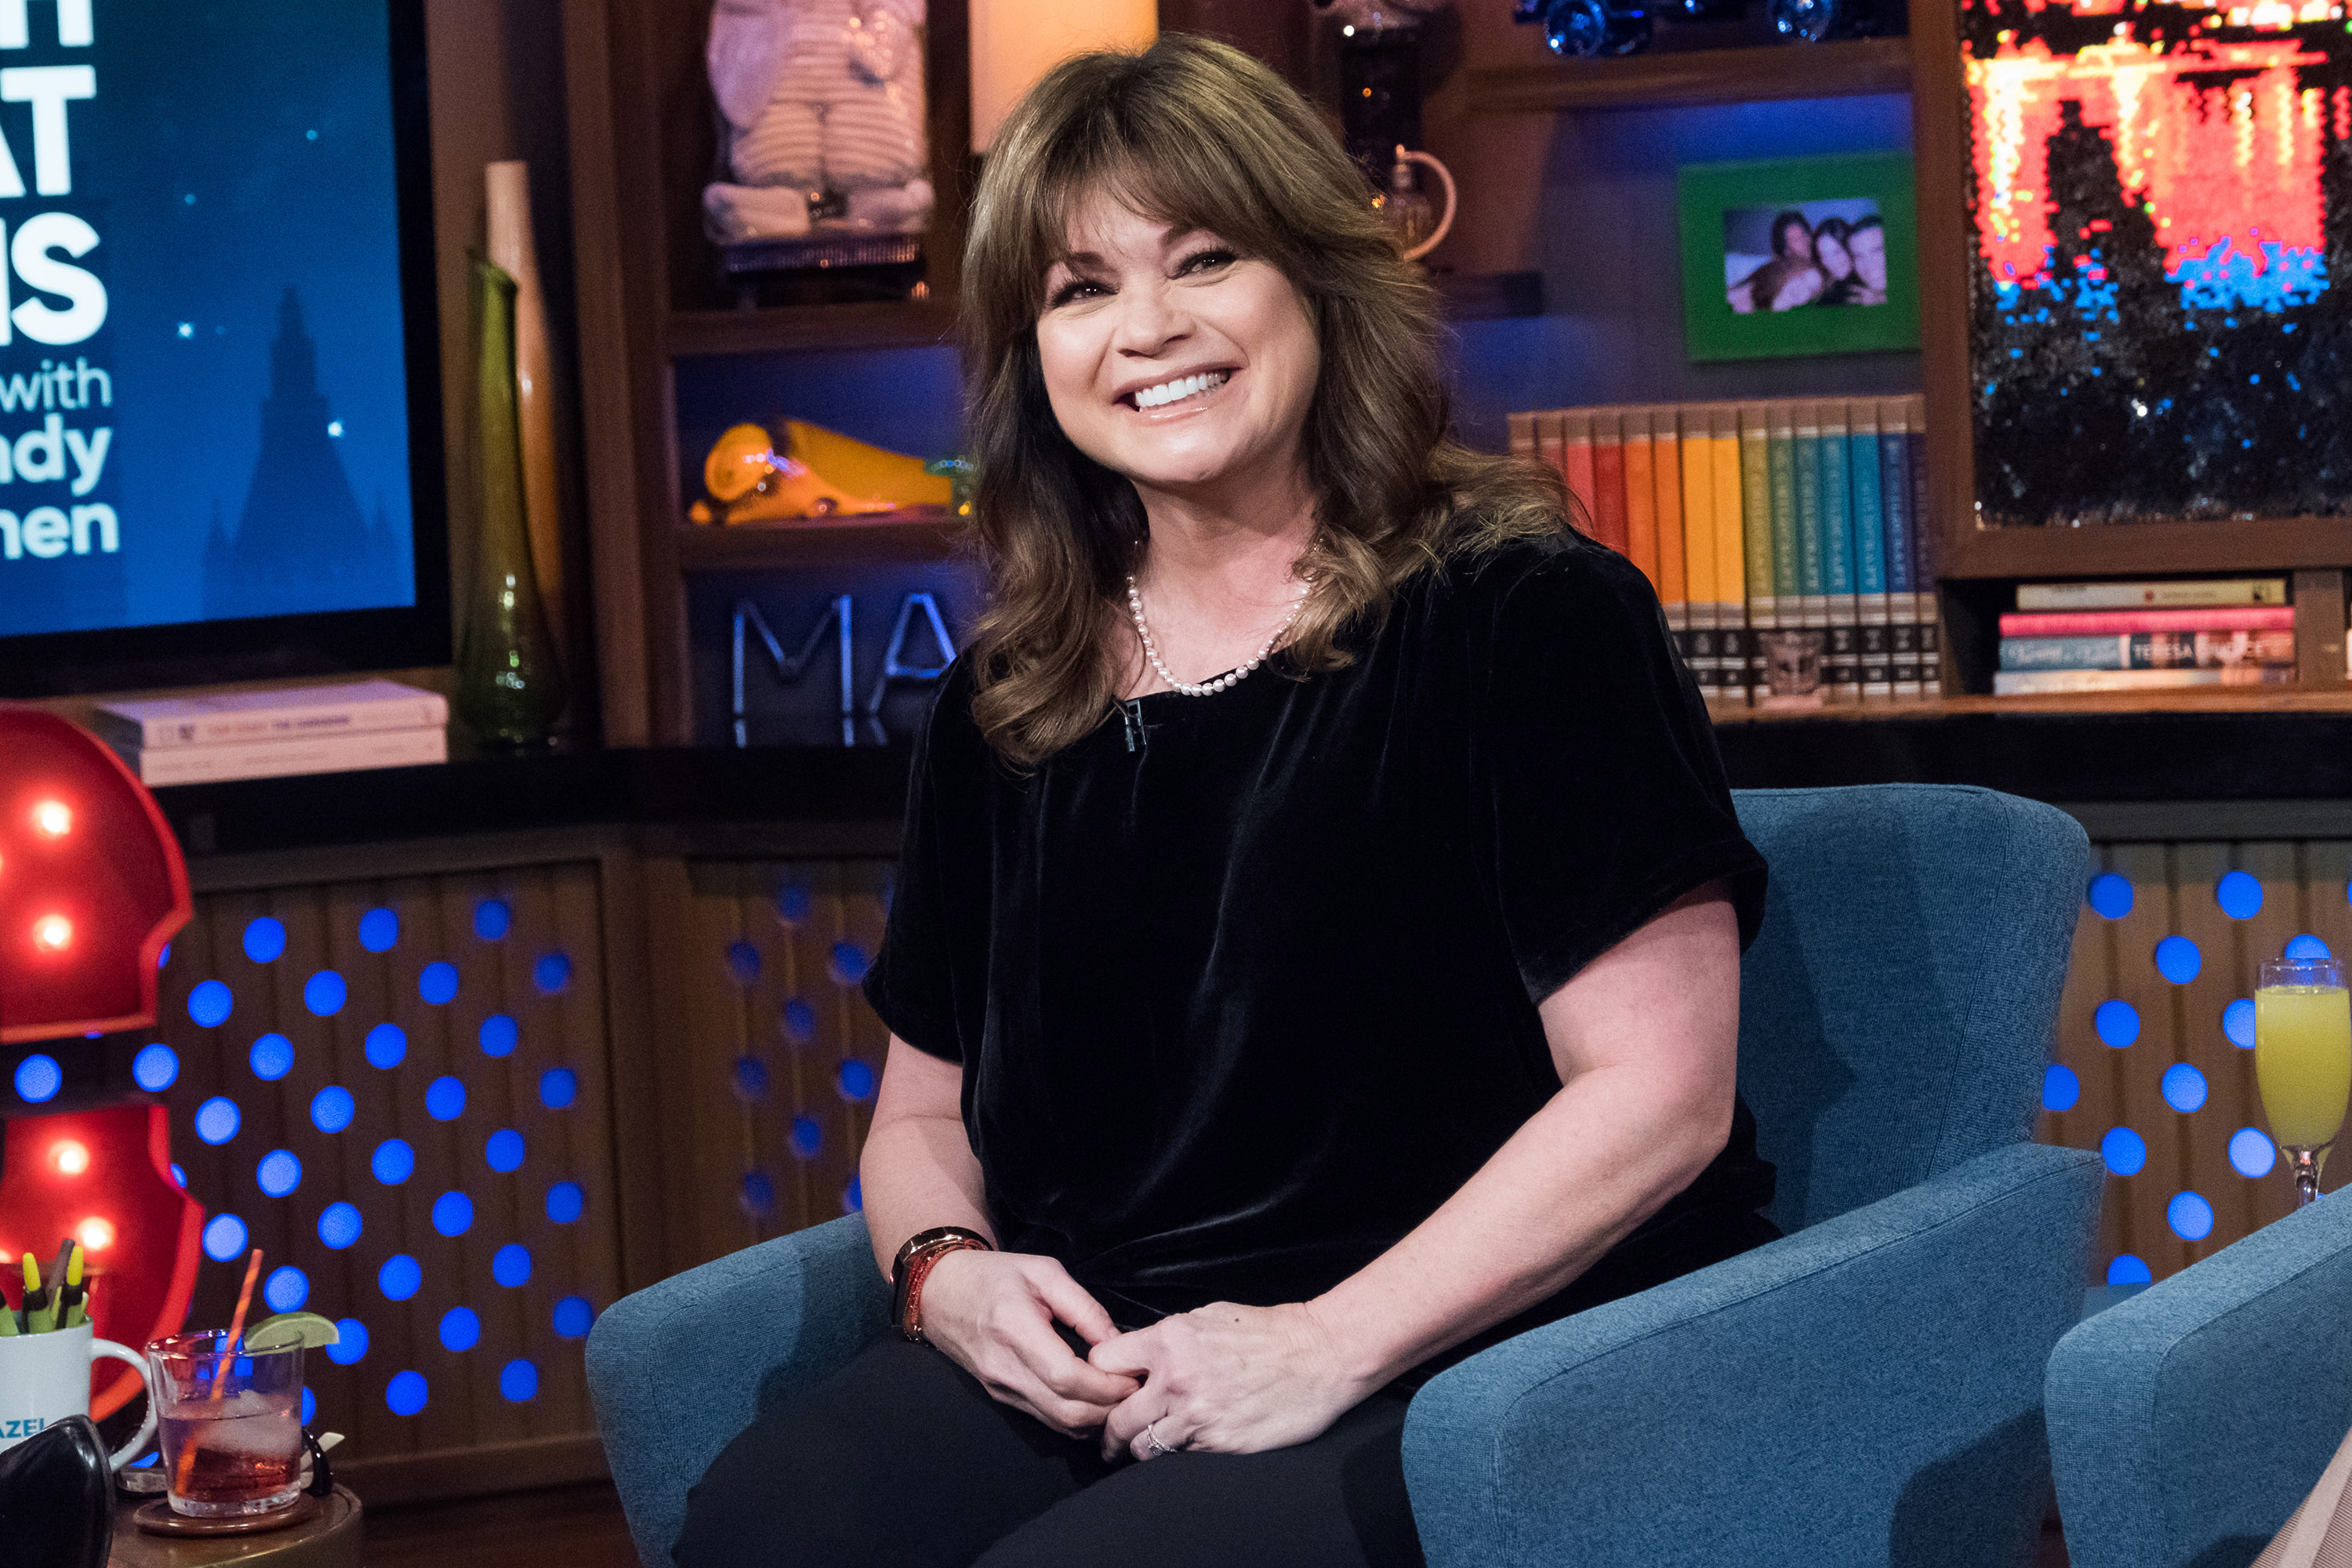 Valerie Bertinelli on "Watch What Happens Live With Andy Cohen" on October 18, 2017. | Source: Getty Images